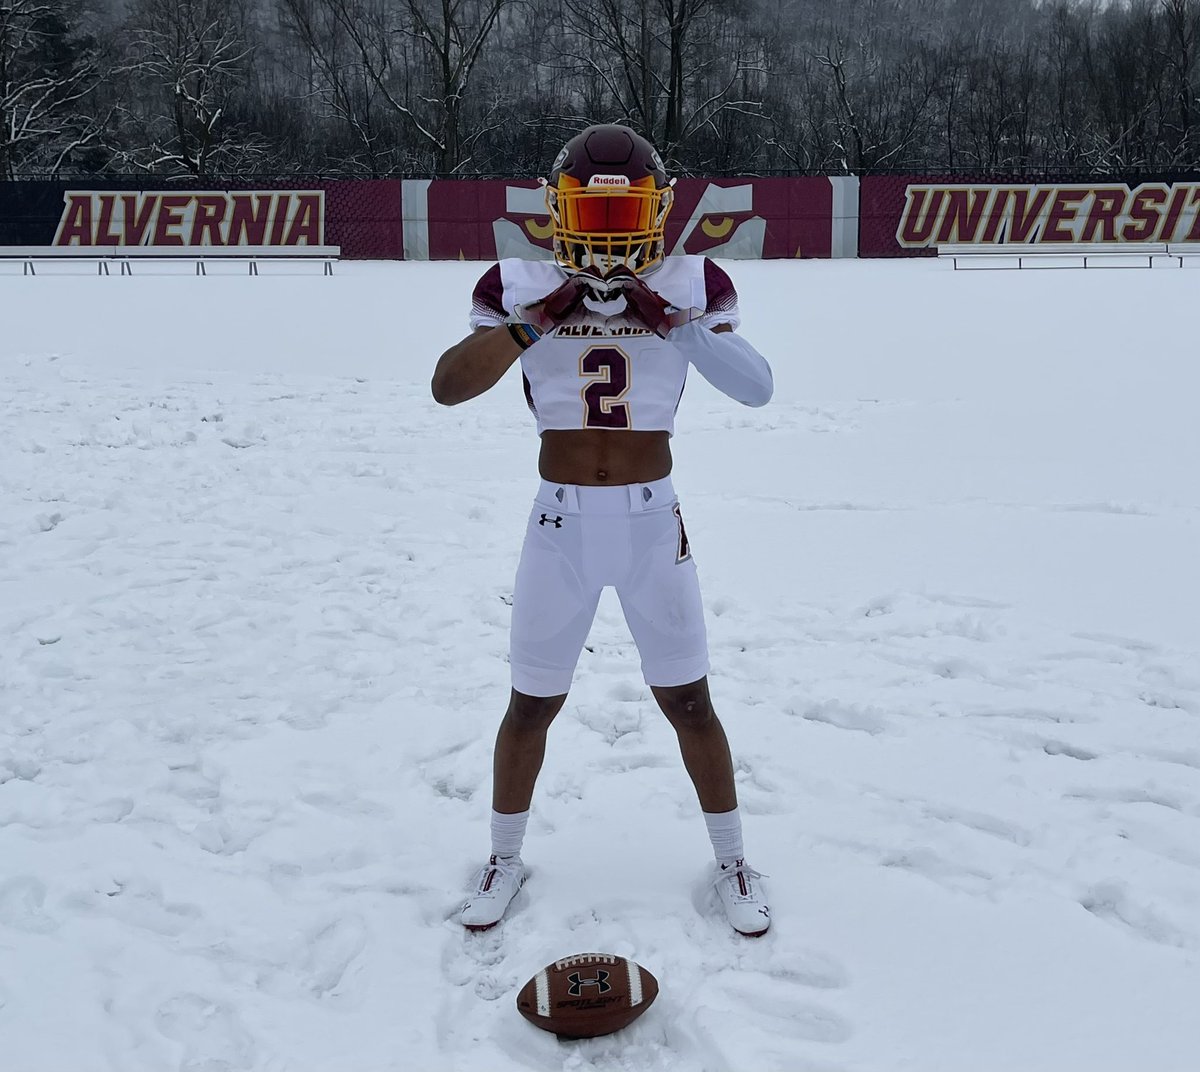 No better place to be but HERE‼️🥶 #thewolvesway #itget2scary👻 @AlverniaFB